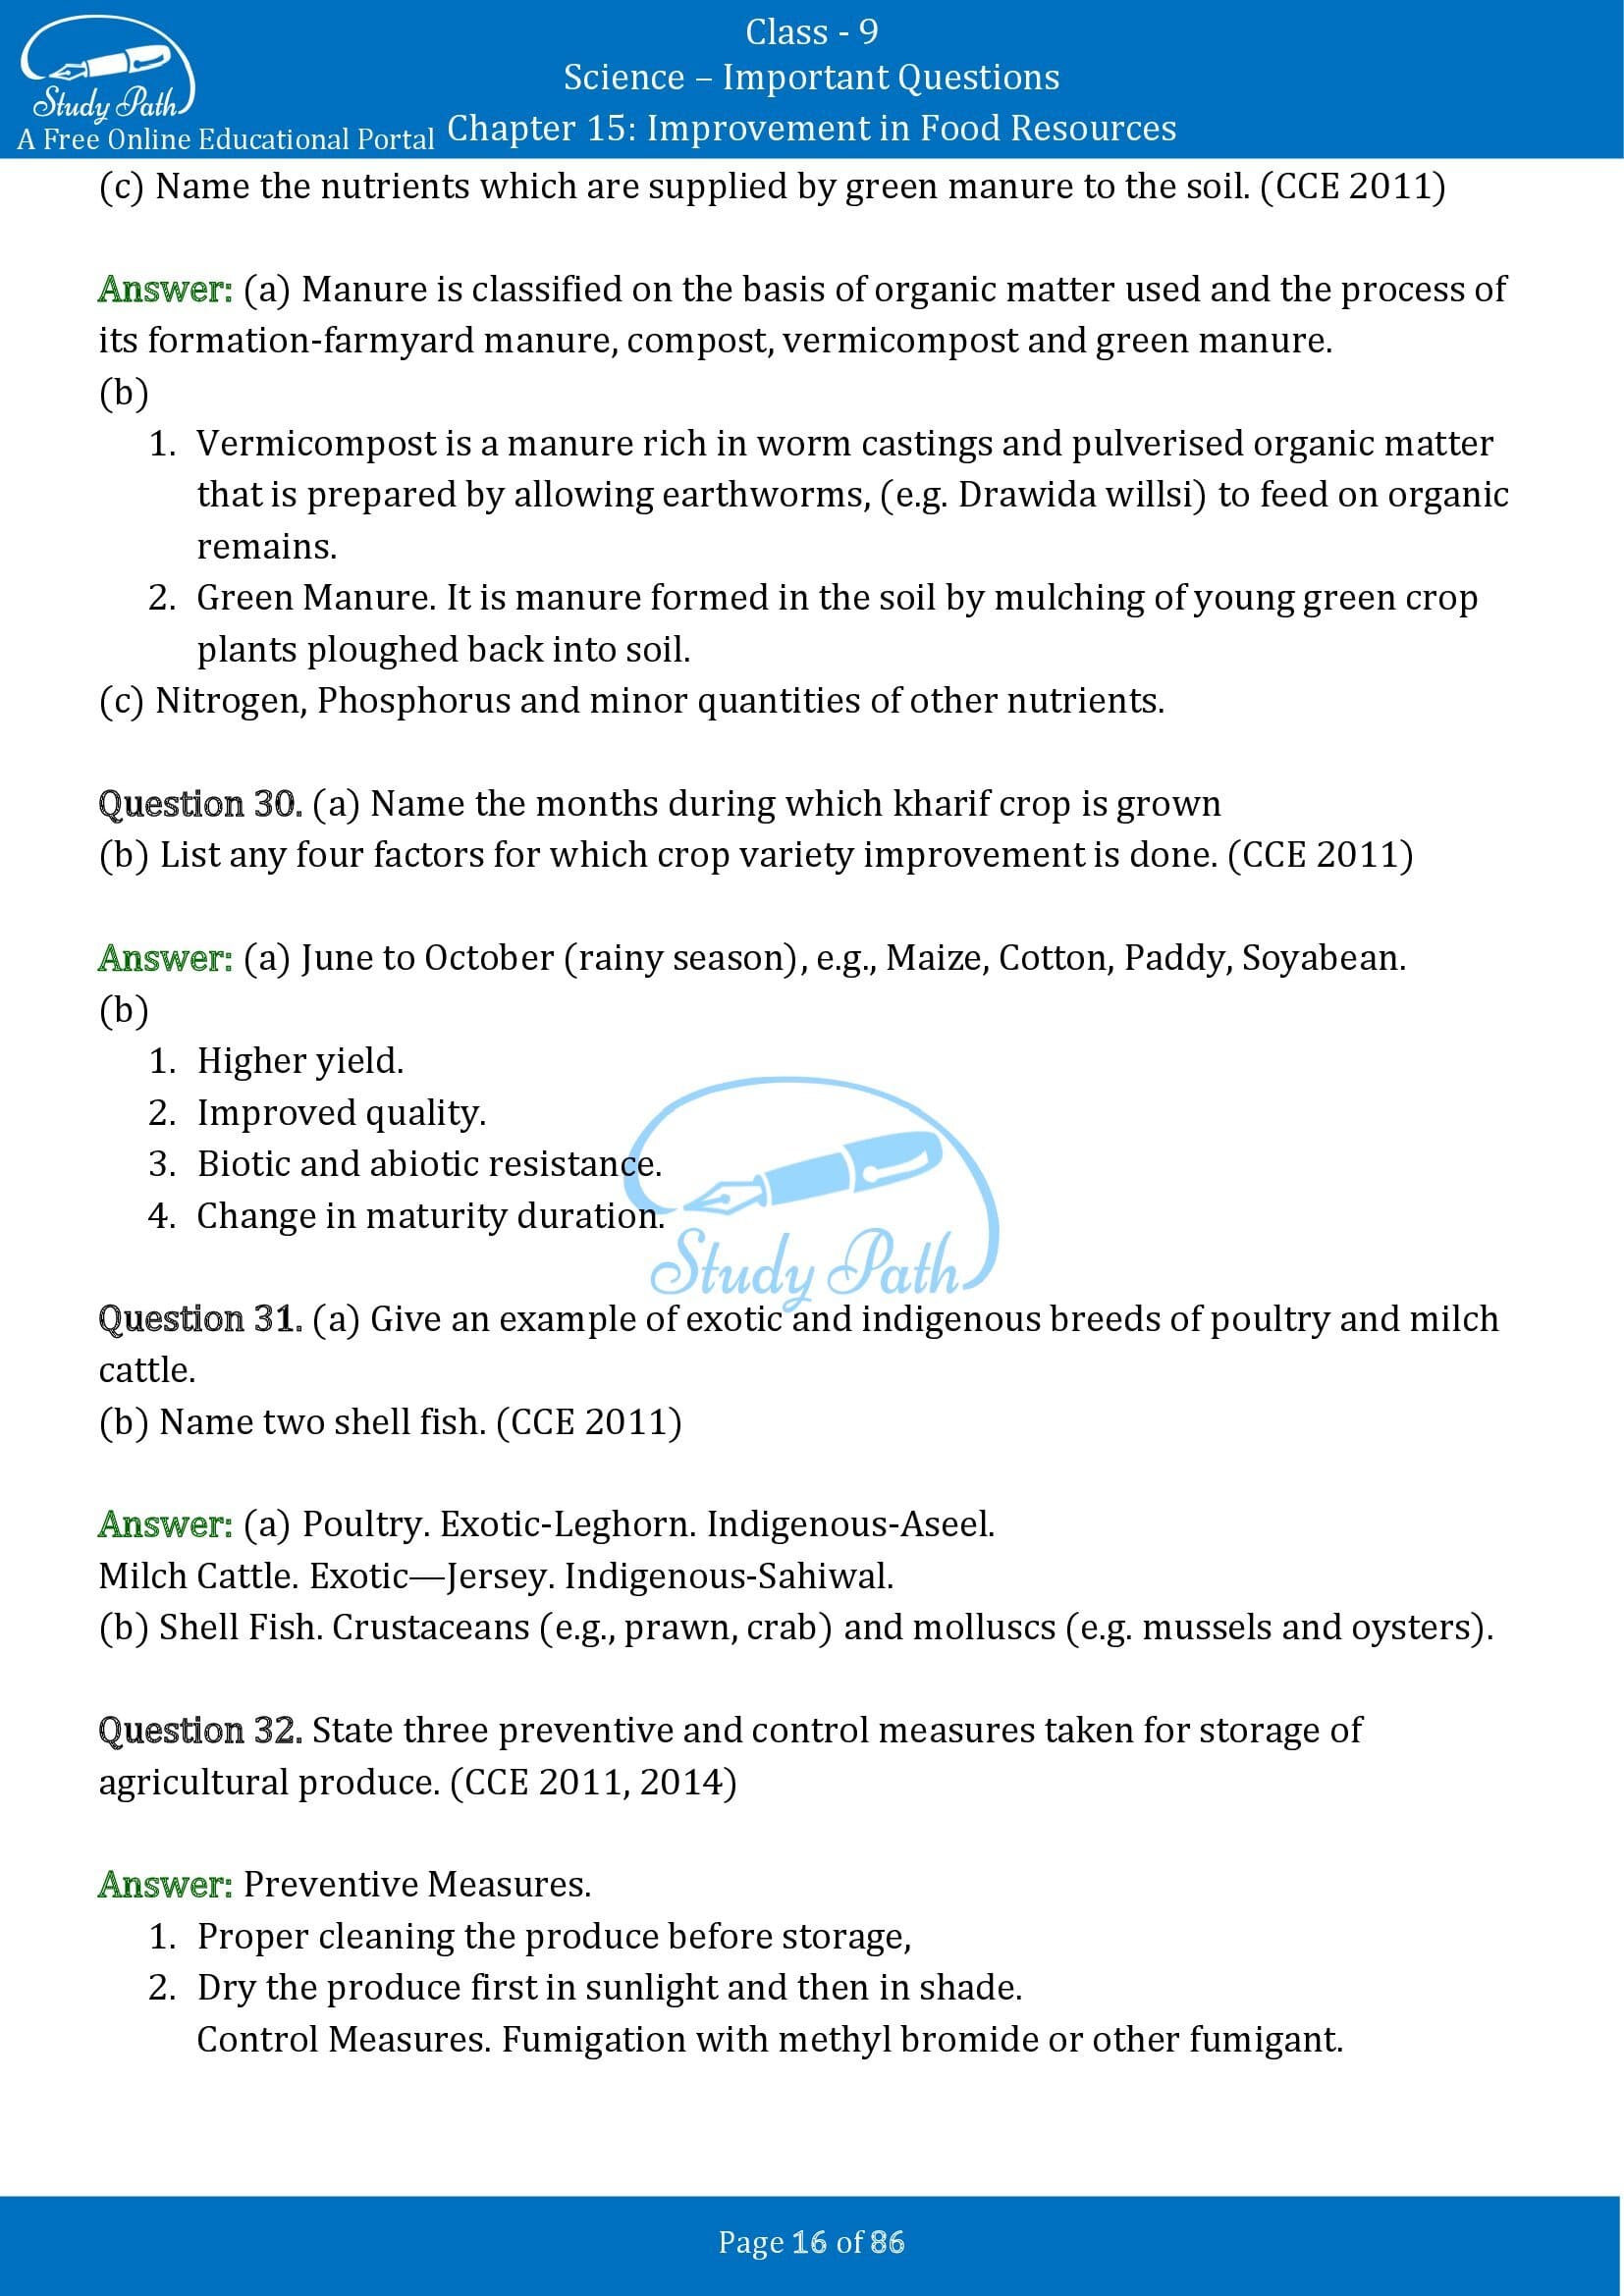 Important Questions for Class 9 Science Chapter 15 Improvement in Food Resources 00016